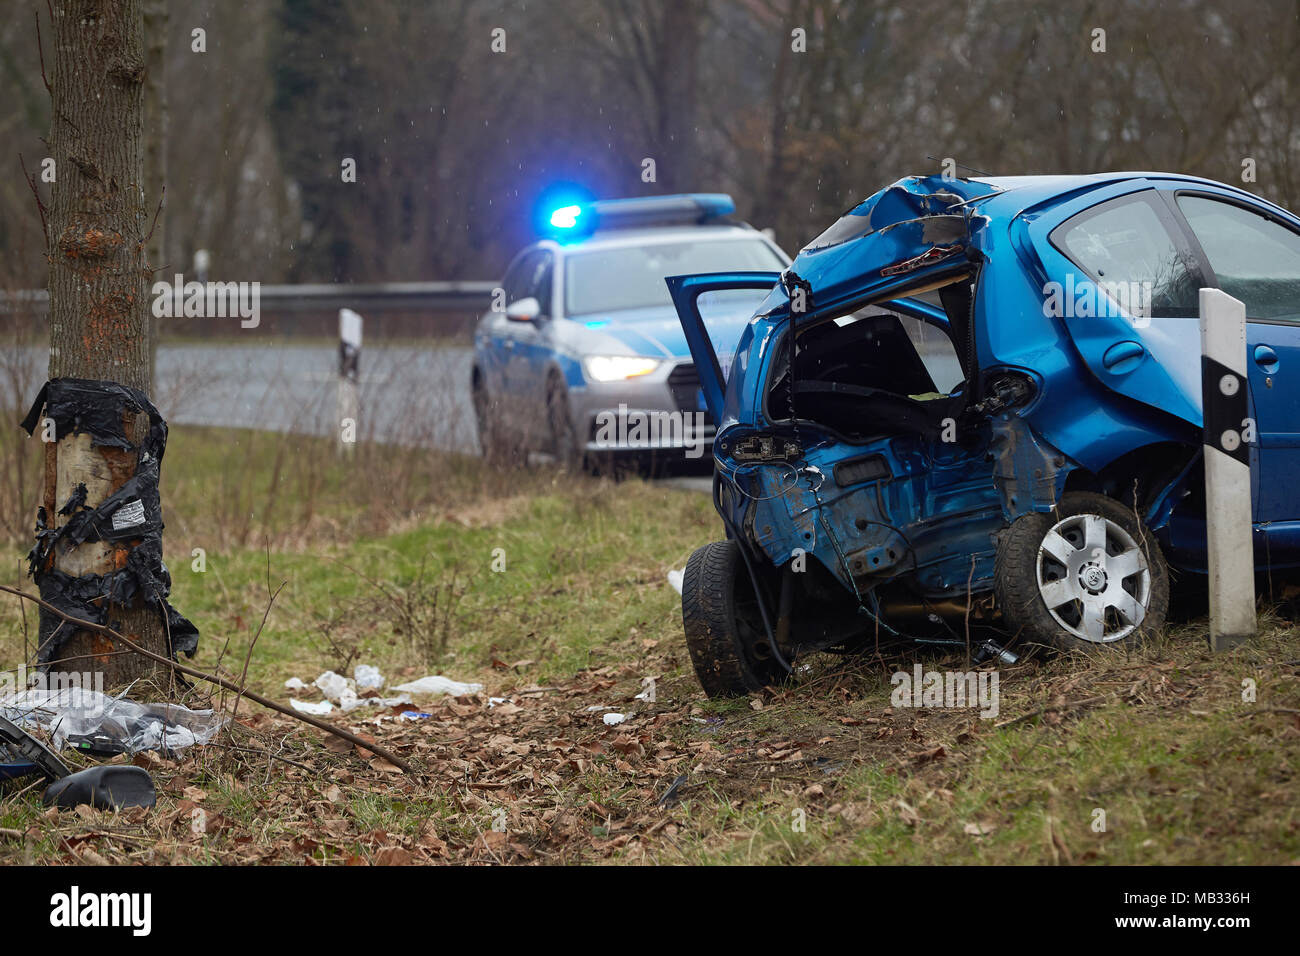 Car accident on a country road, car with rear end peprallt against a tree, police car flashing in the back, Germany Stock Photo